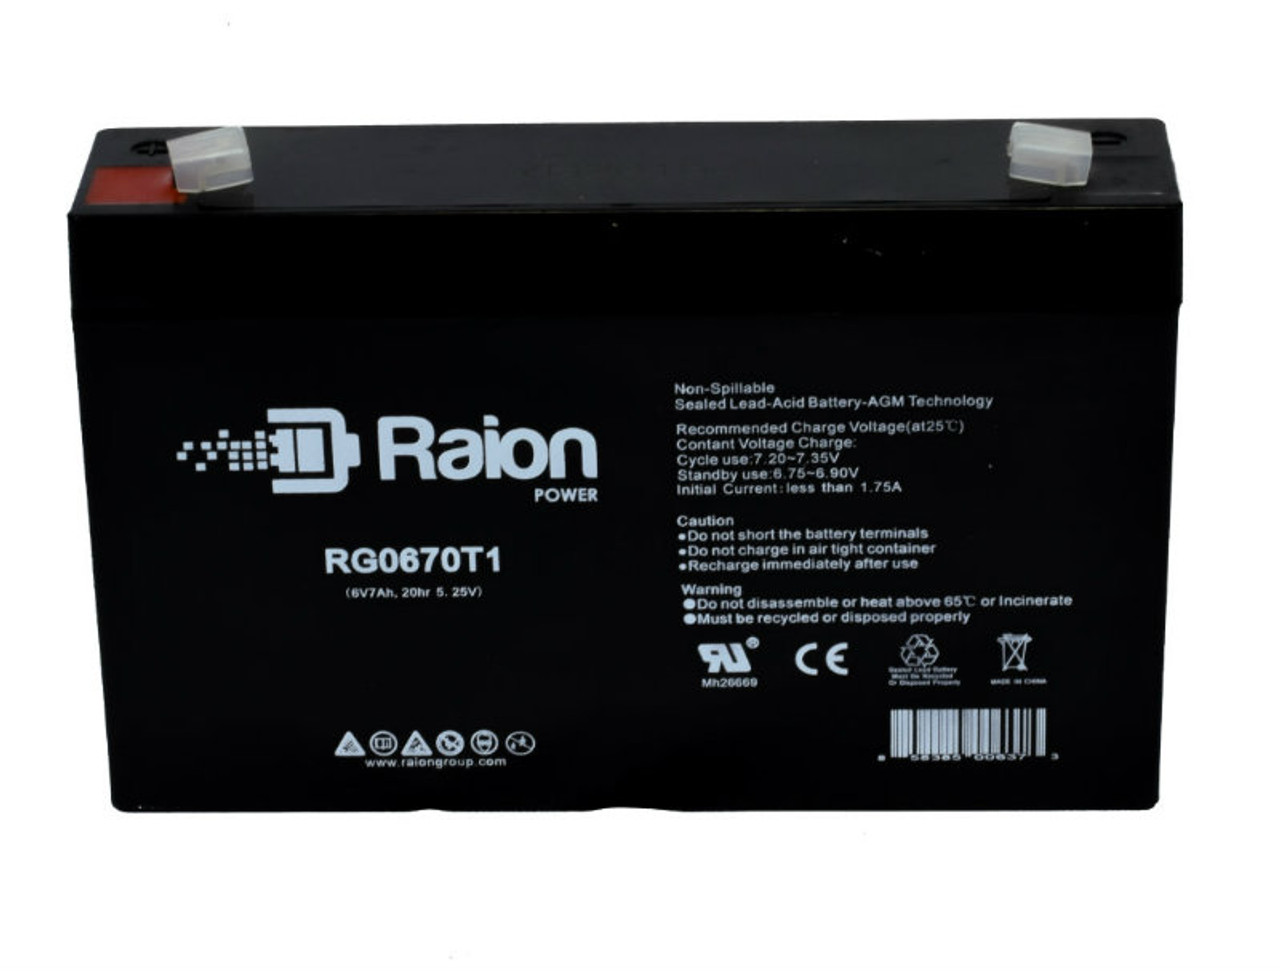 Raion Power RG0670T1 Replacement Battery Cartridge for Ivy Biomedical System 701 ECG MONITOR